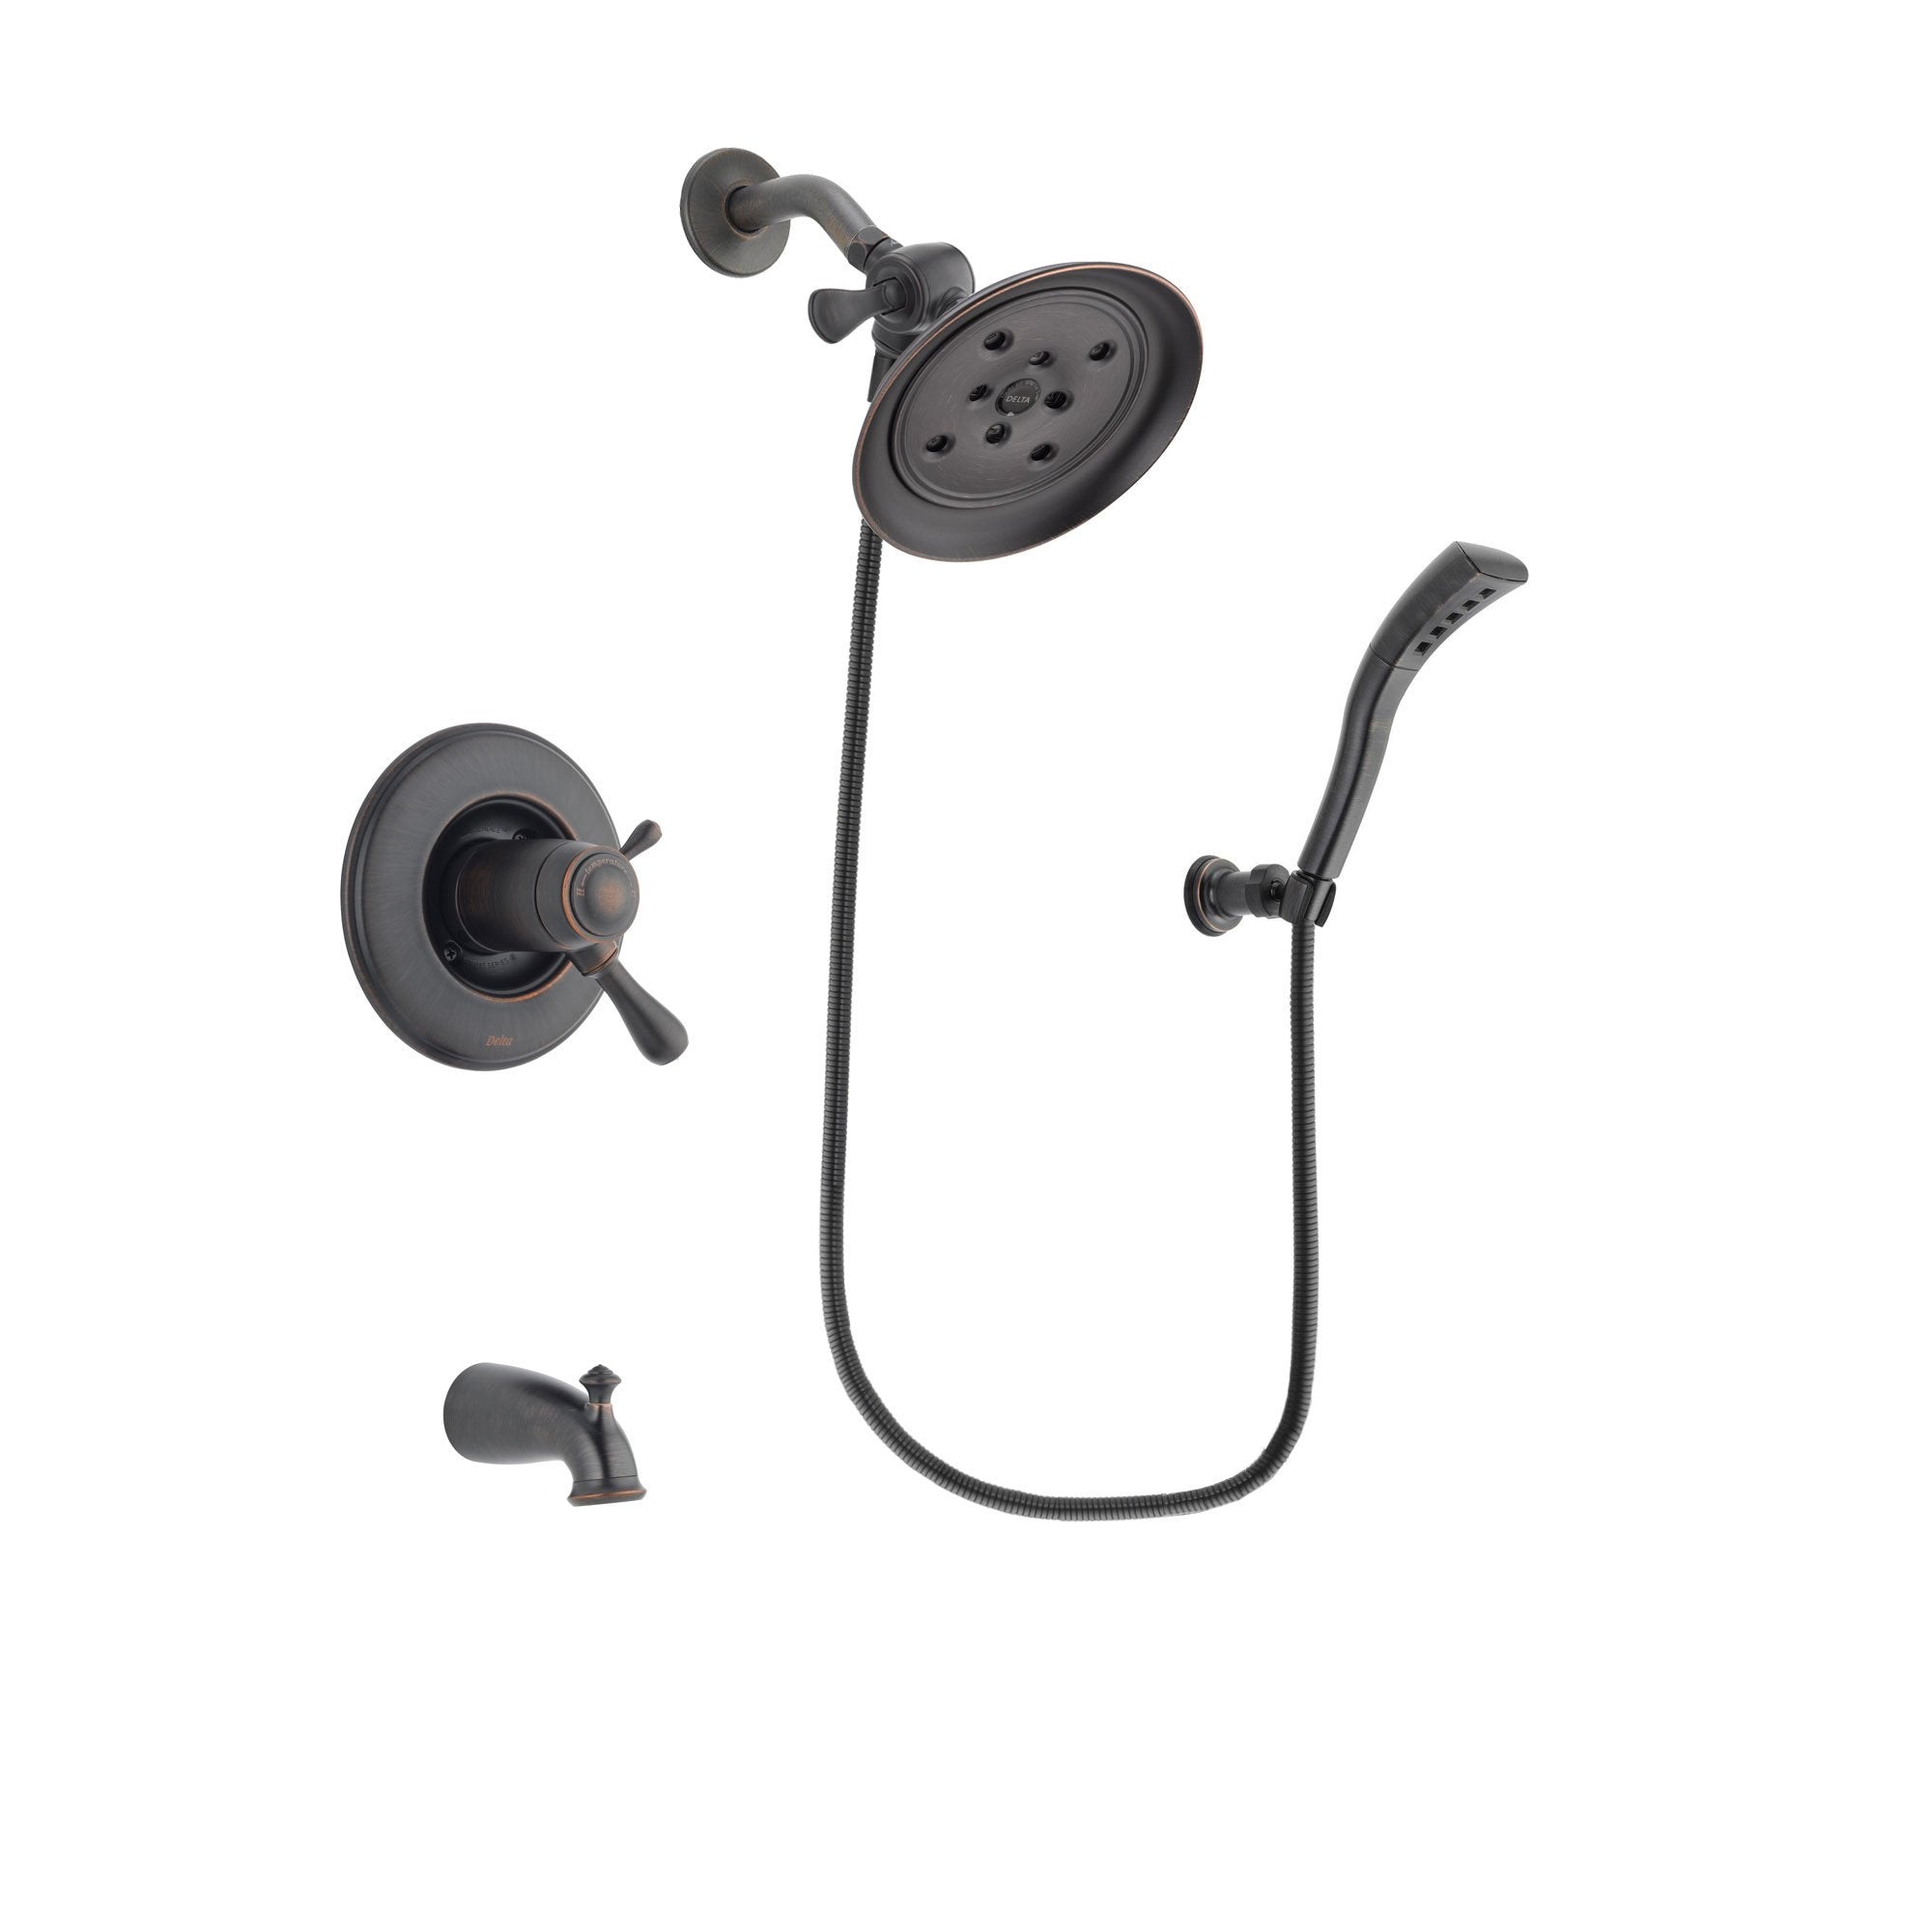 Delta Leland Venetian Bronze Finish Thermostatic Tub and Shower Faucet System Package with Large Rain Shower Head and Modern Wall Mount Personal Handheld Shower Spray Includes Rough-in Valve and Tub Spout DSP2925V